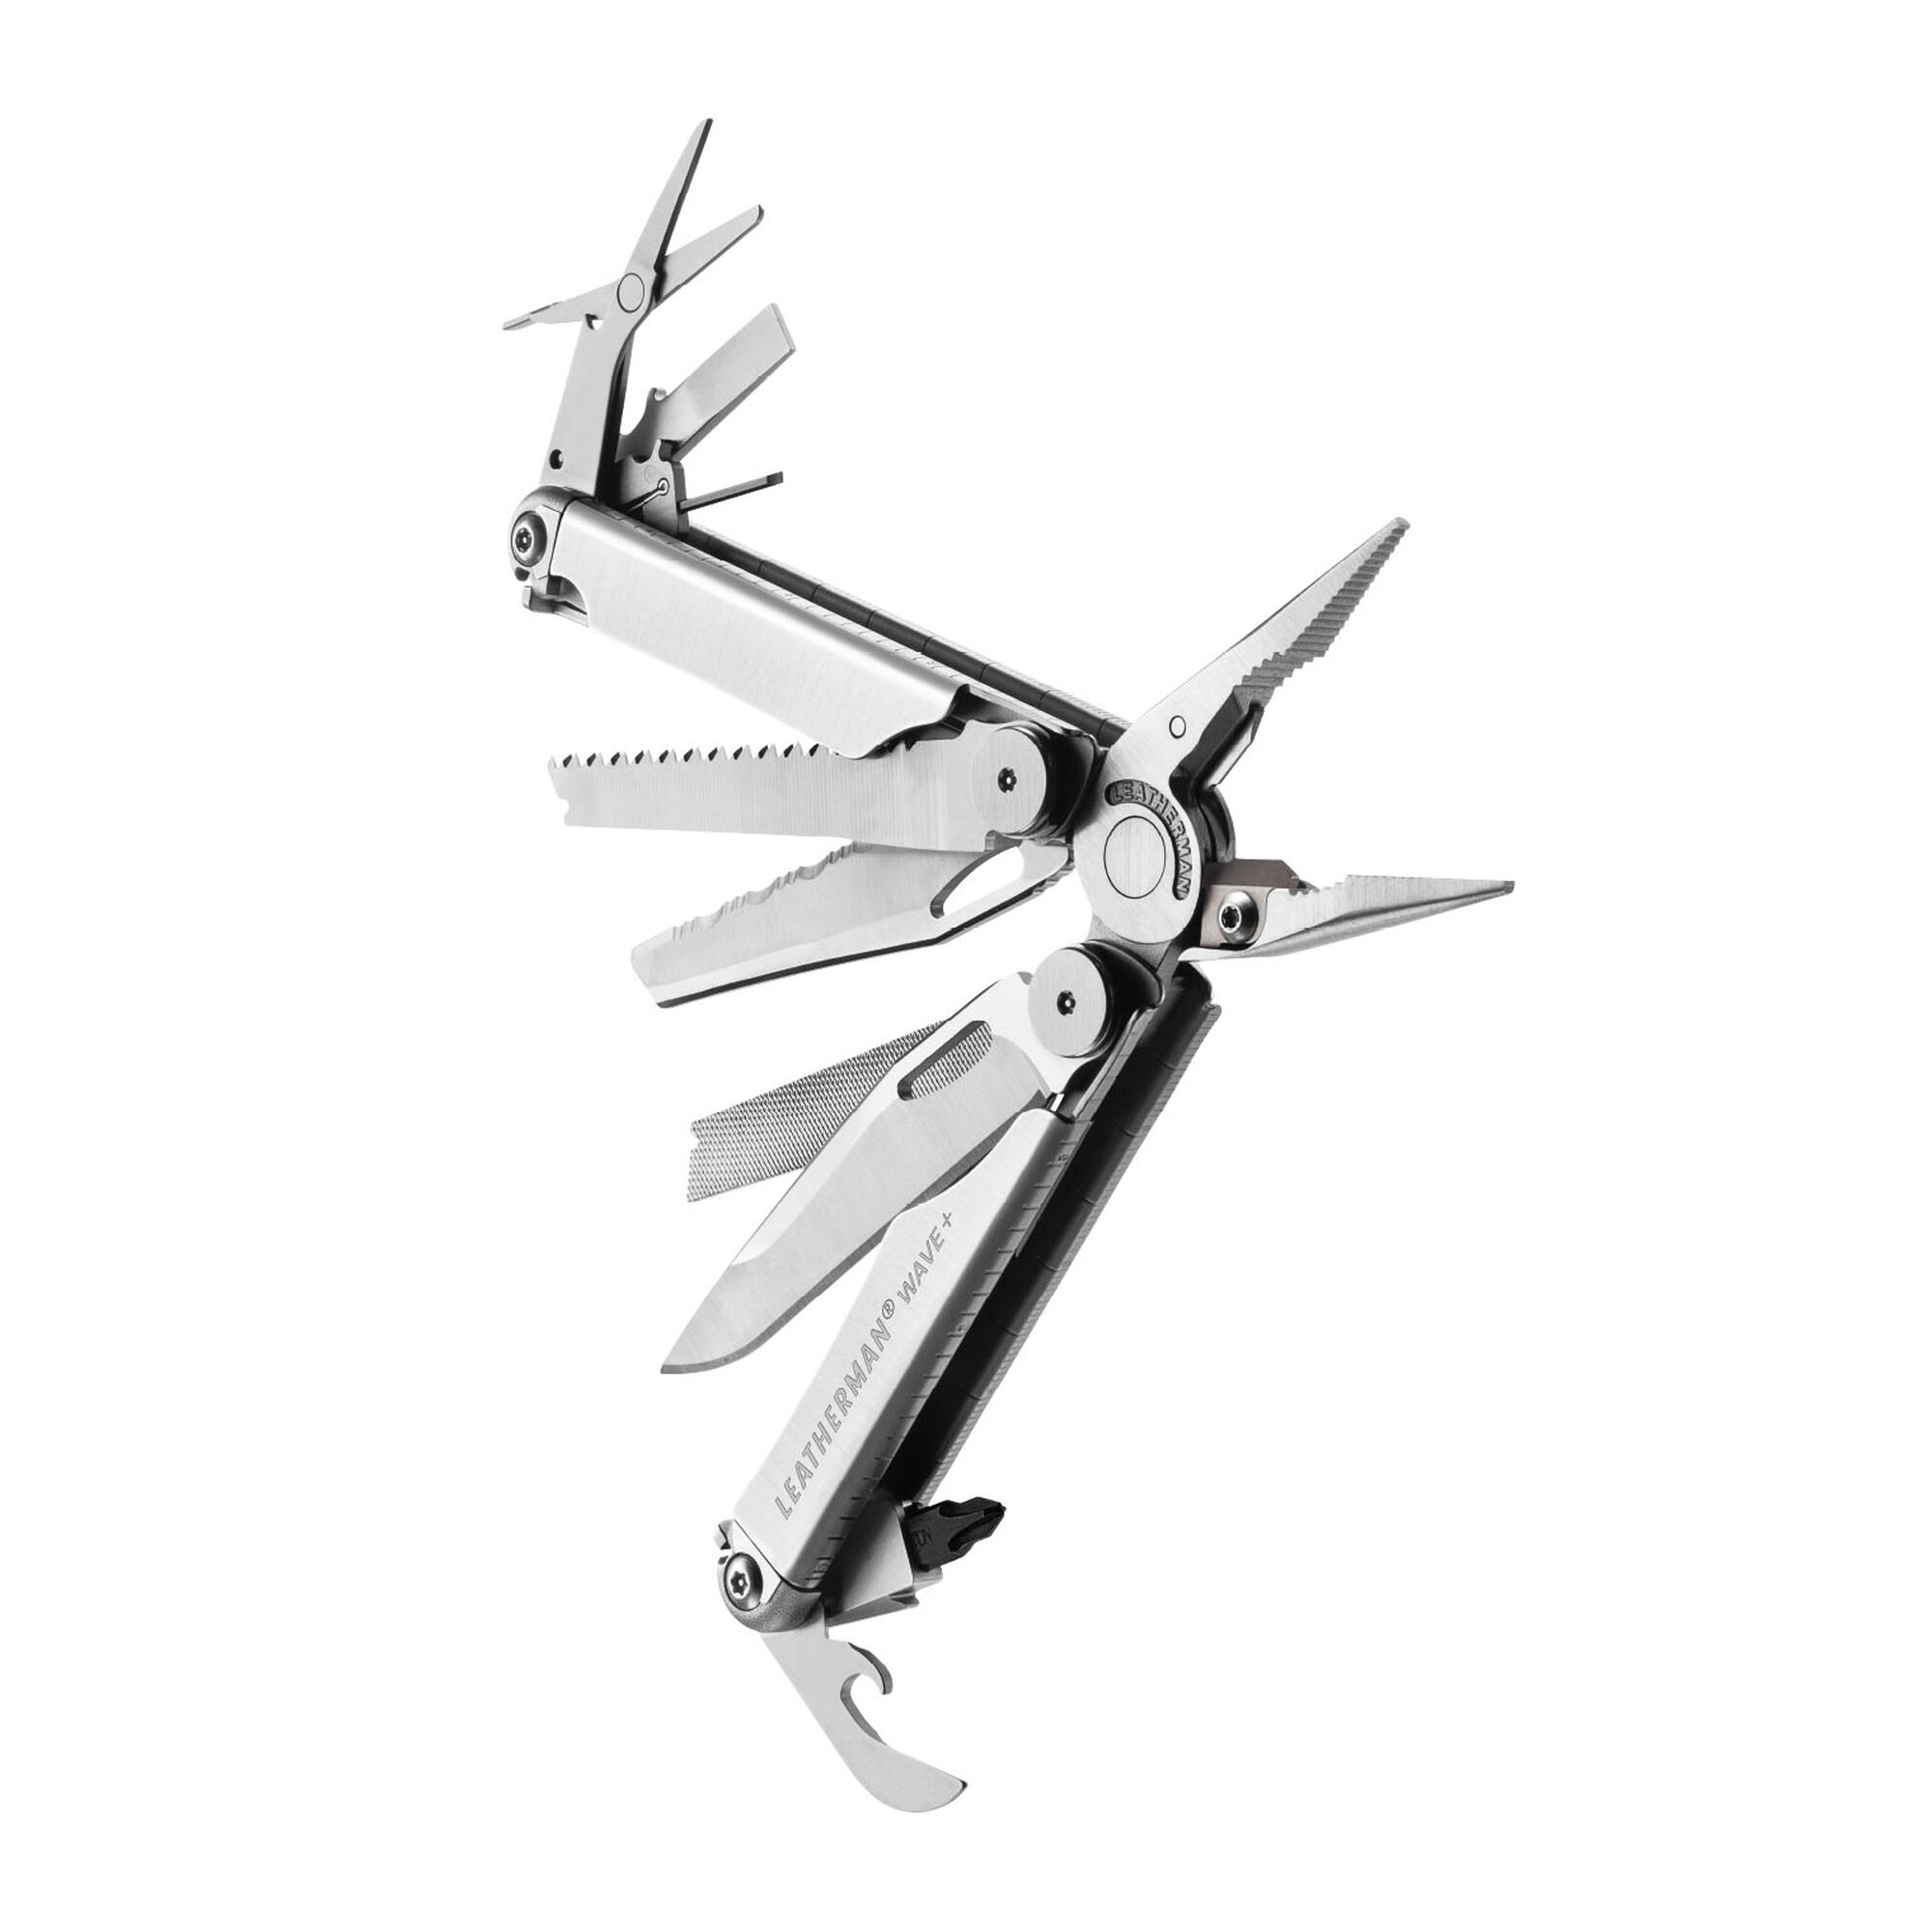 Leatherman Wave Plus and ARC side by side, as requested: : r/multitools